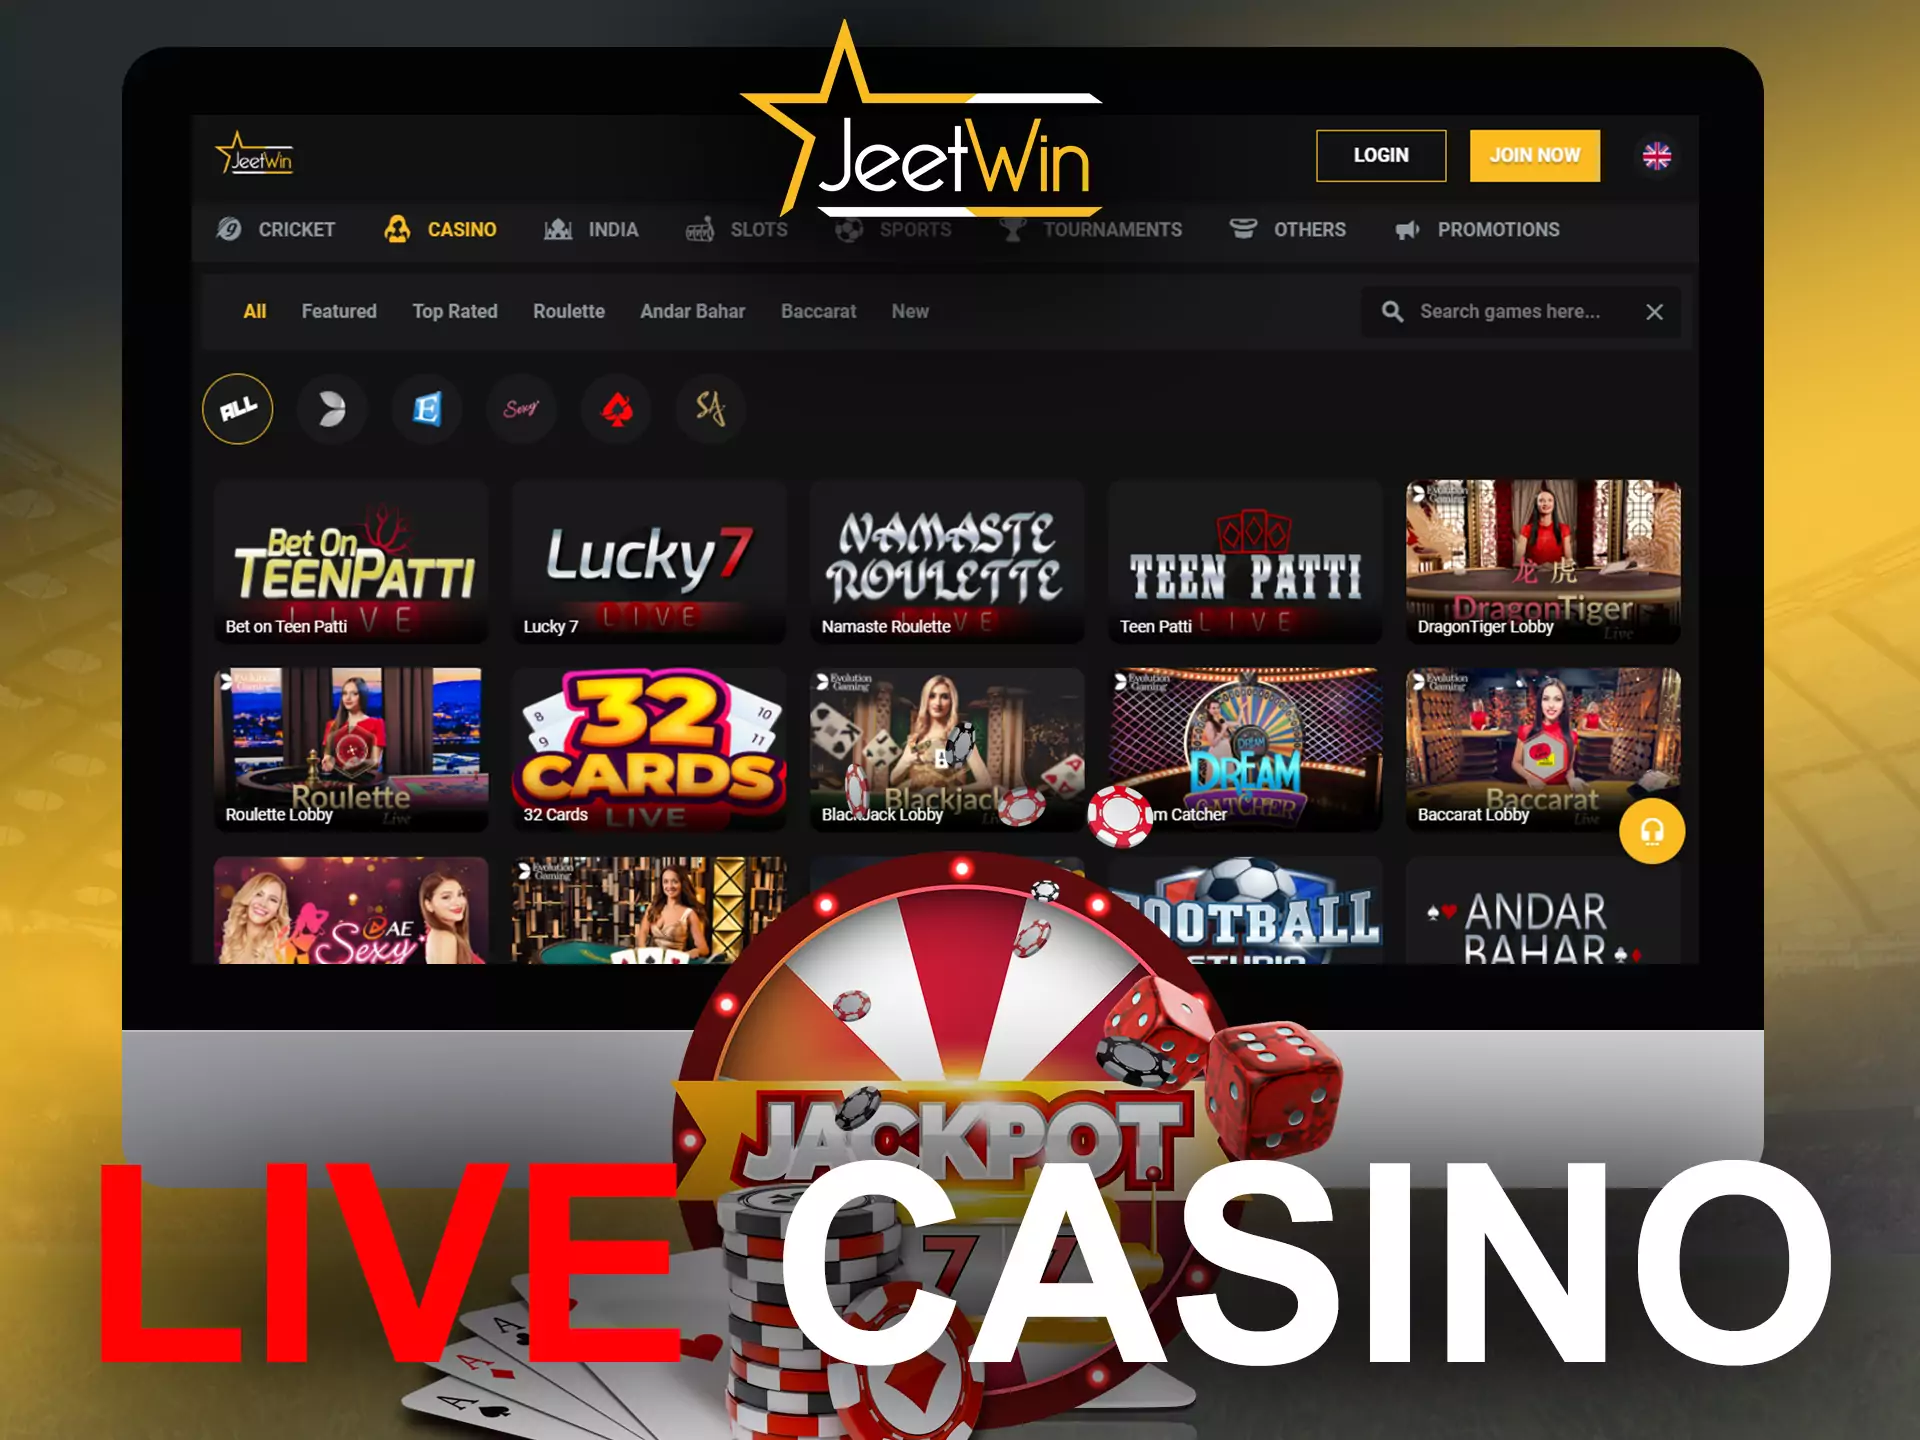 Have fun in the game at JeetWin Live Casino.